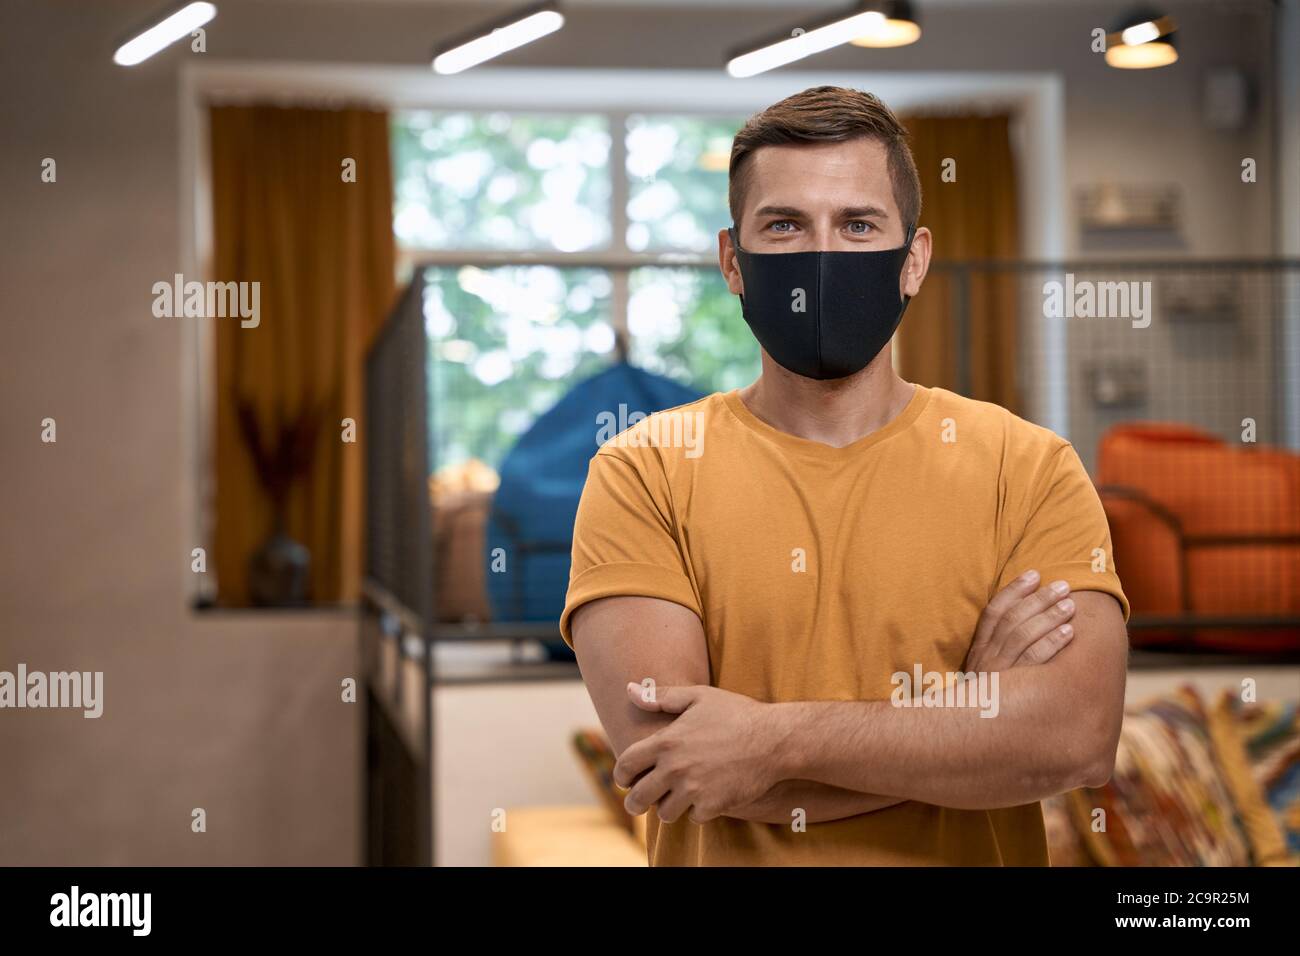 Social distancing at work. Portrait of young confident man, male office worker in protective face mask keeping arms crossed, looking at camera Stock Photo